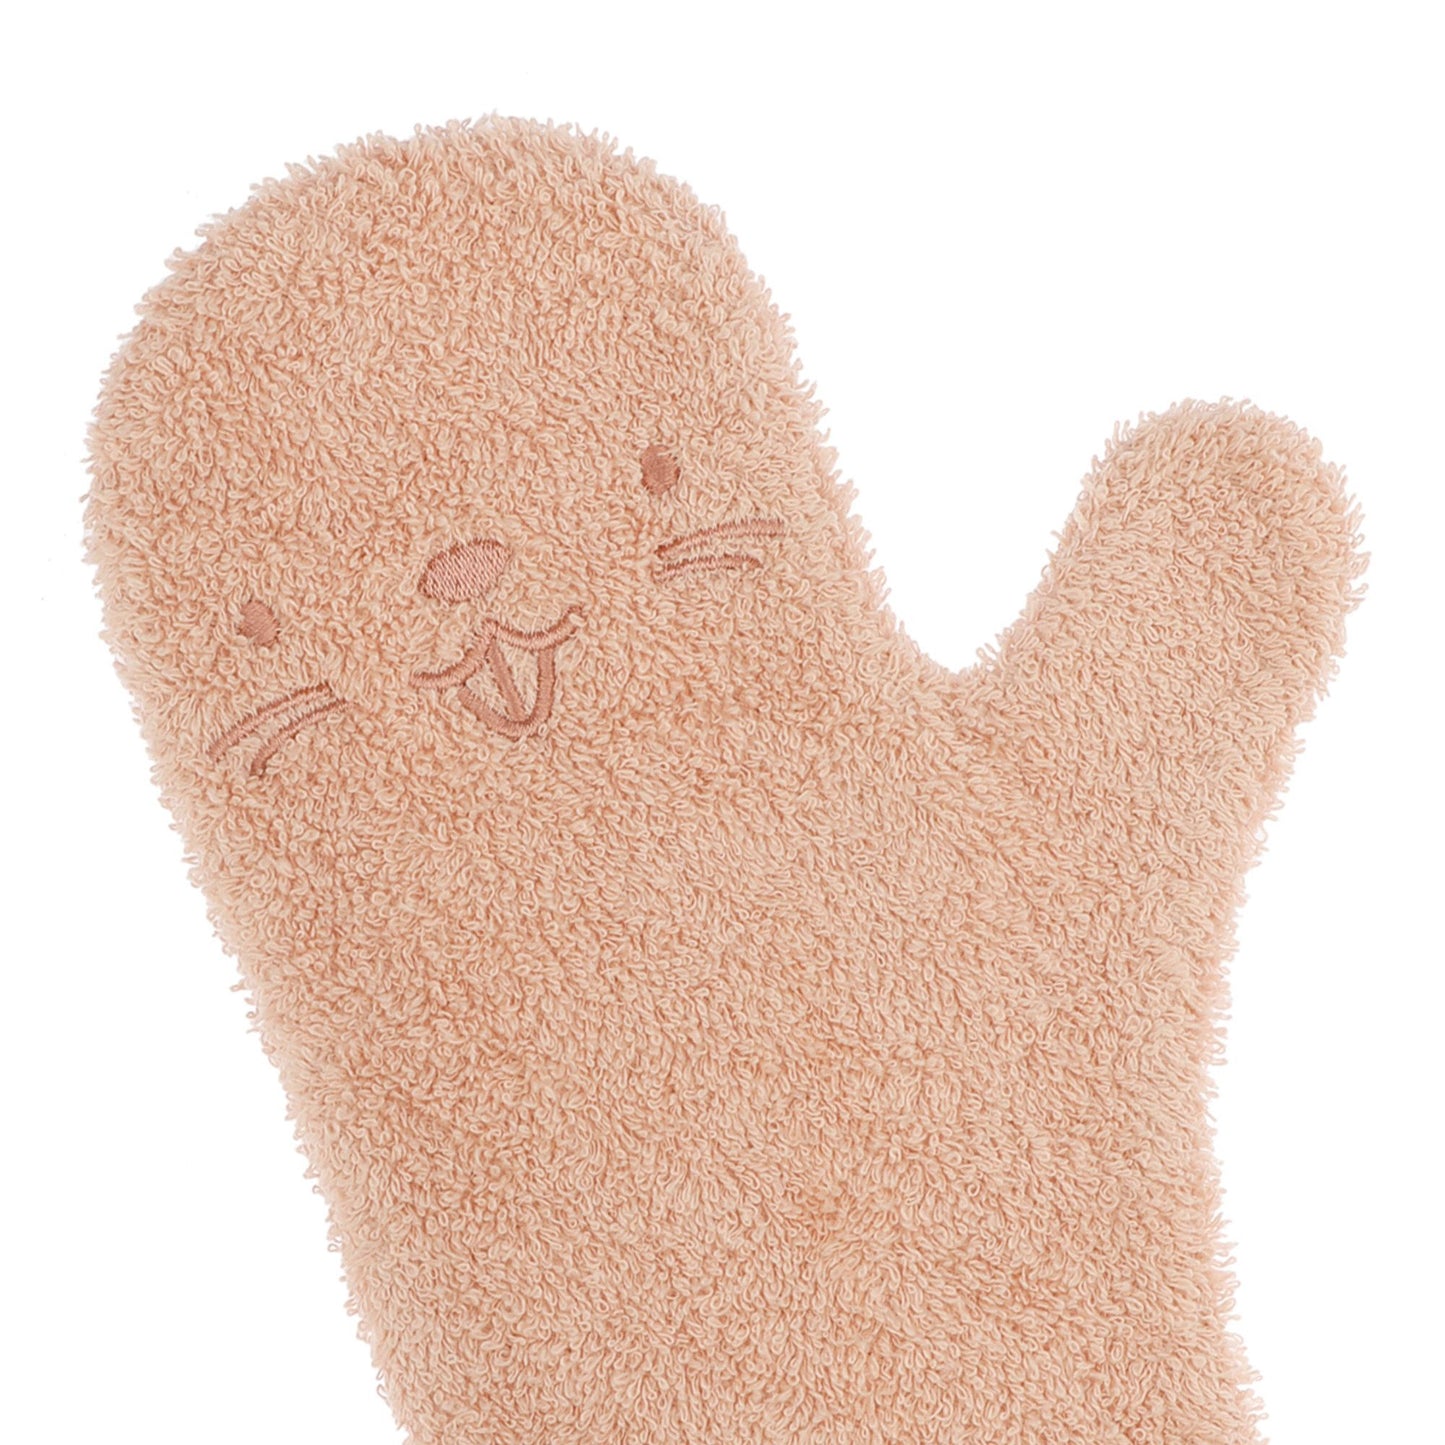 || Nifty || Baby Shower Glove - Old Pink Beaver